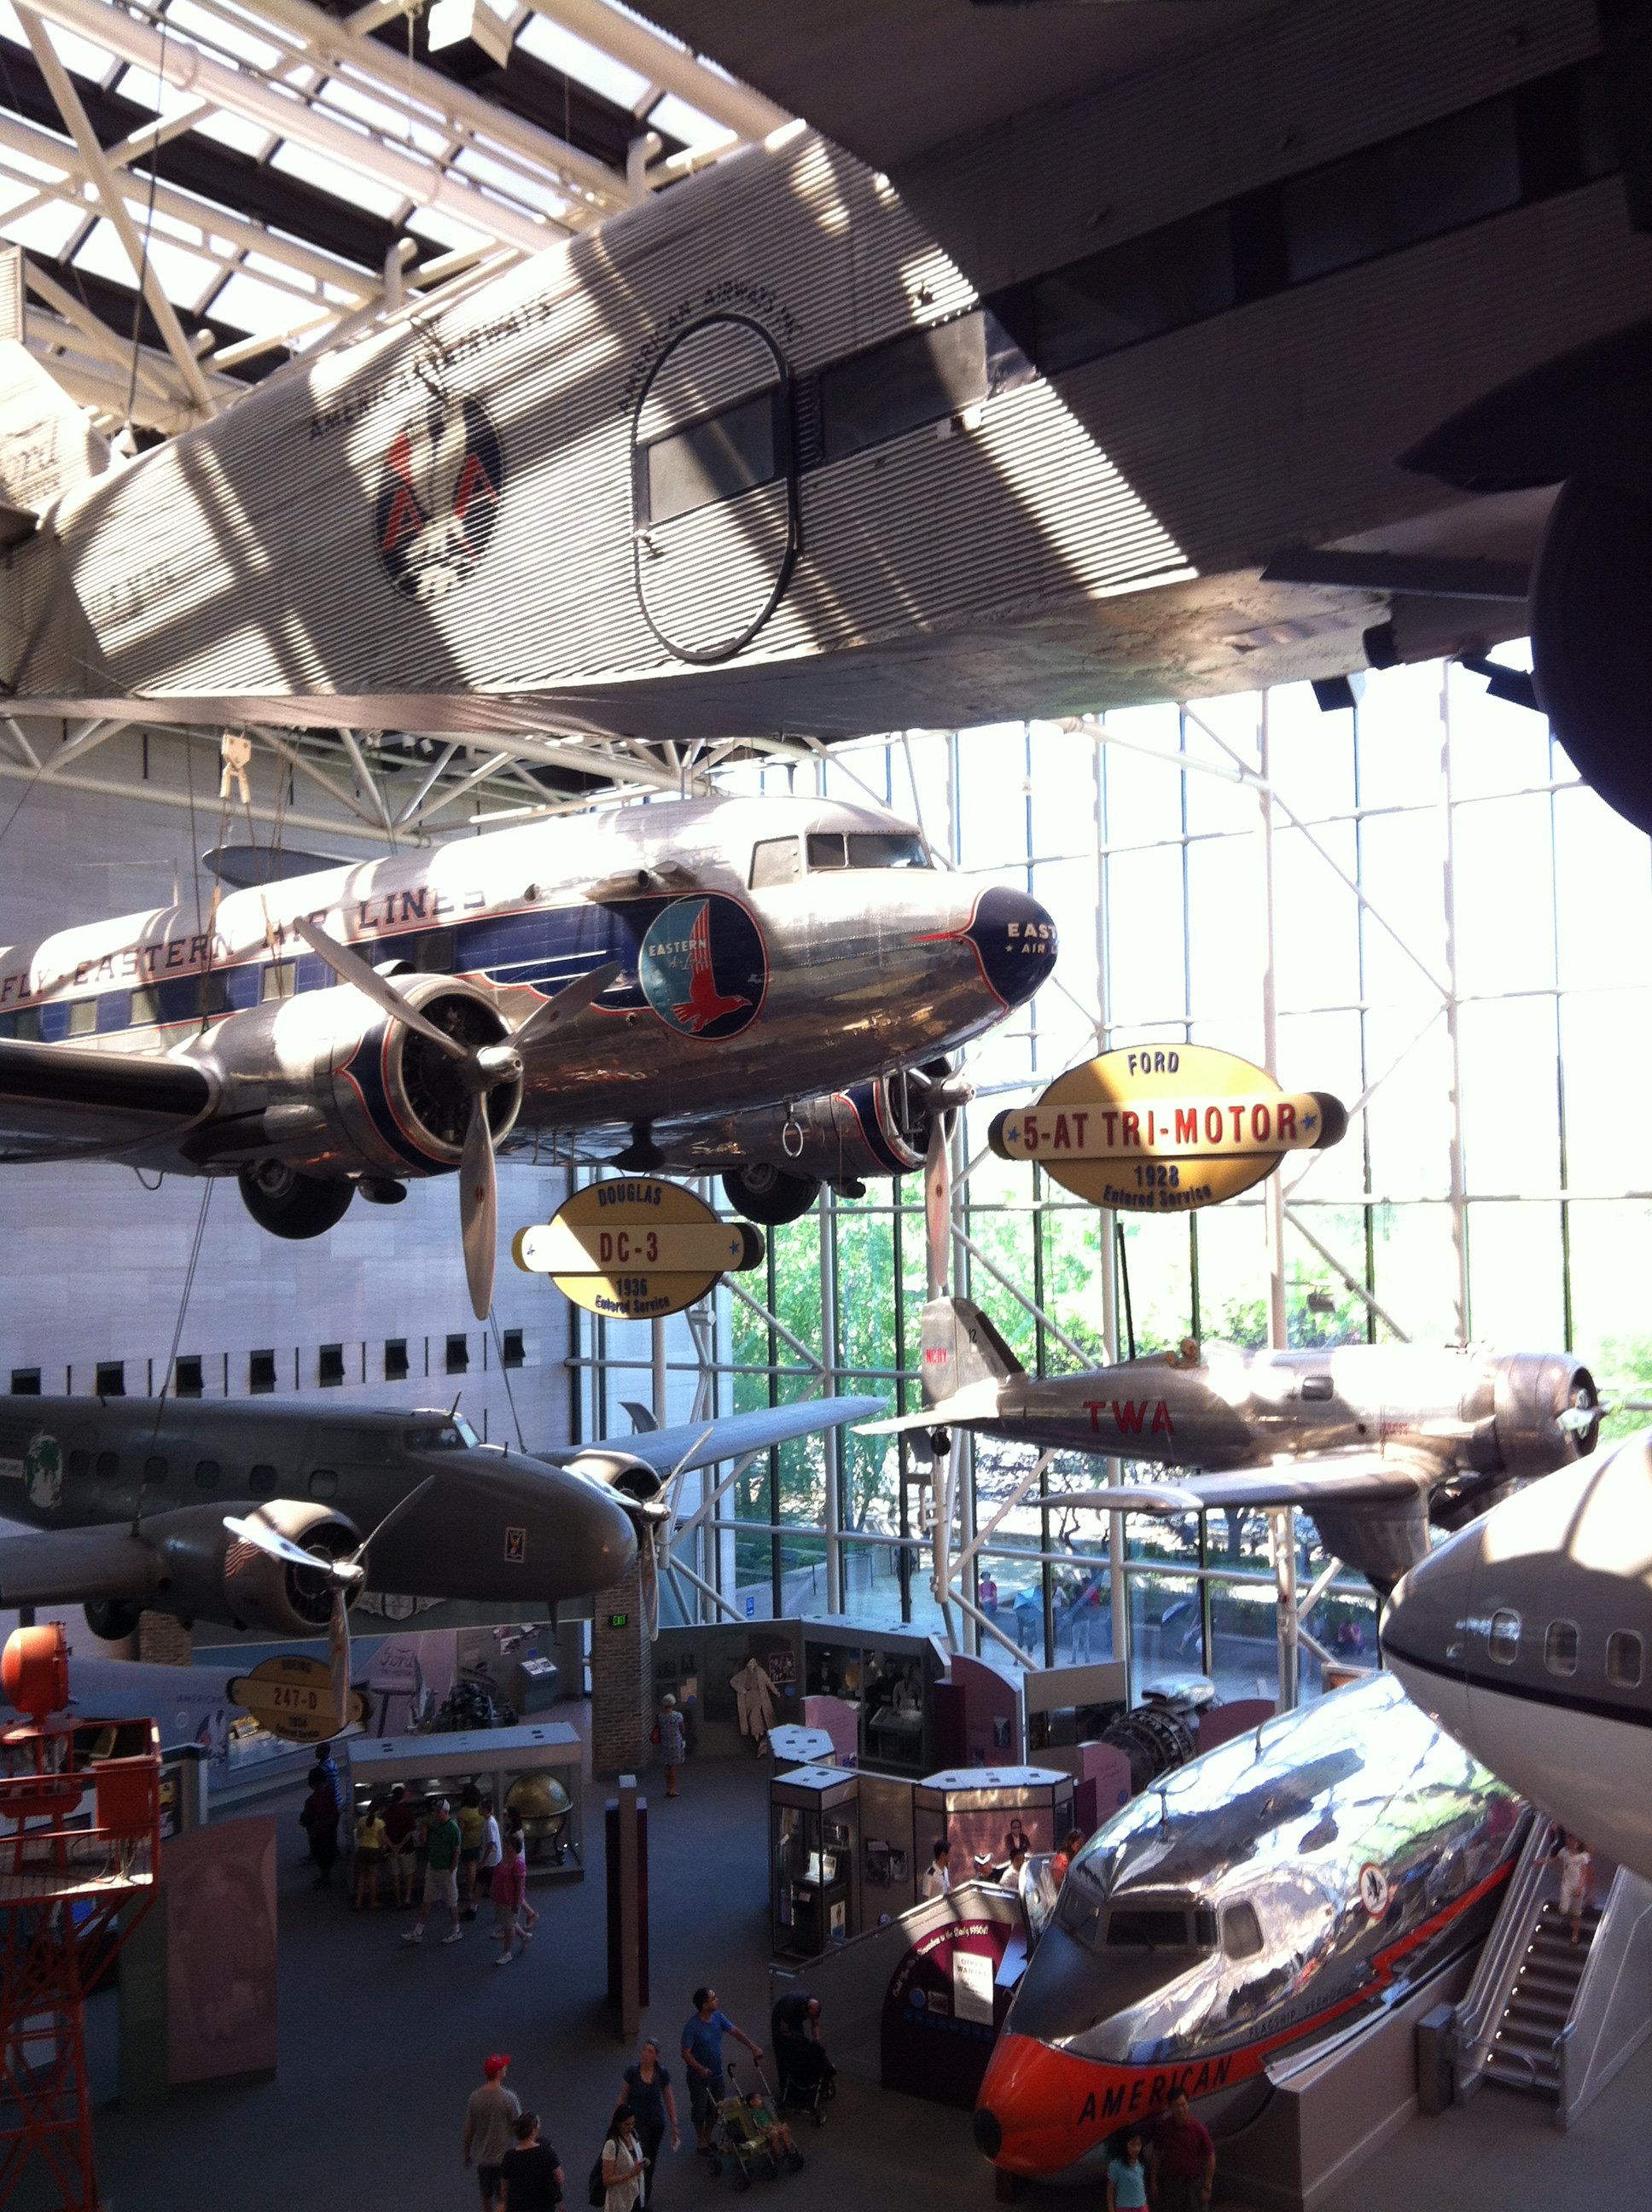 The-National-Air-and-Space-Museum.jpg